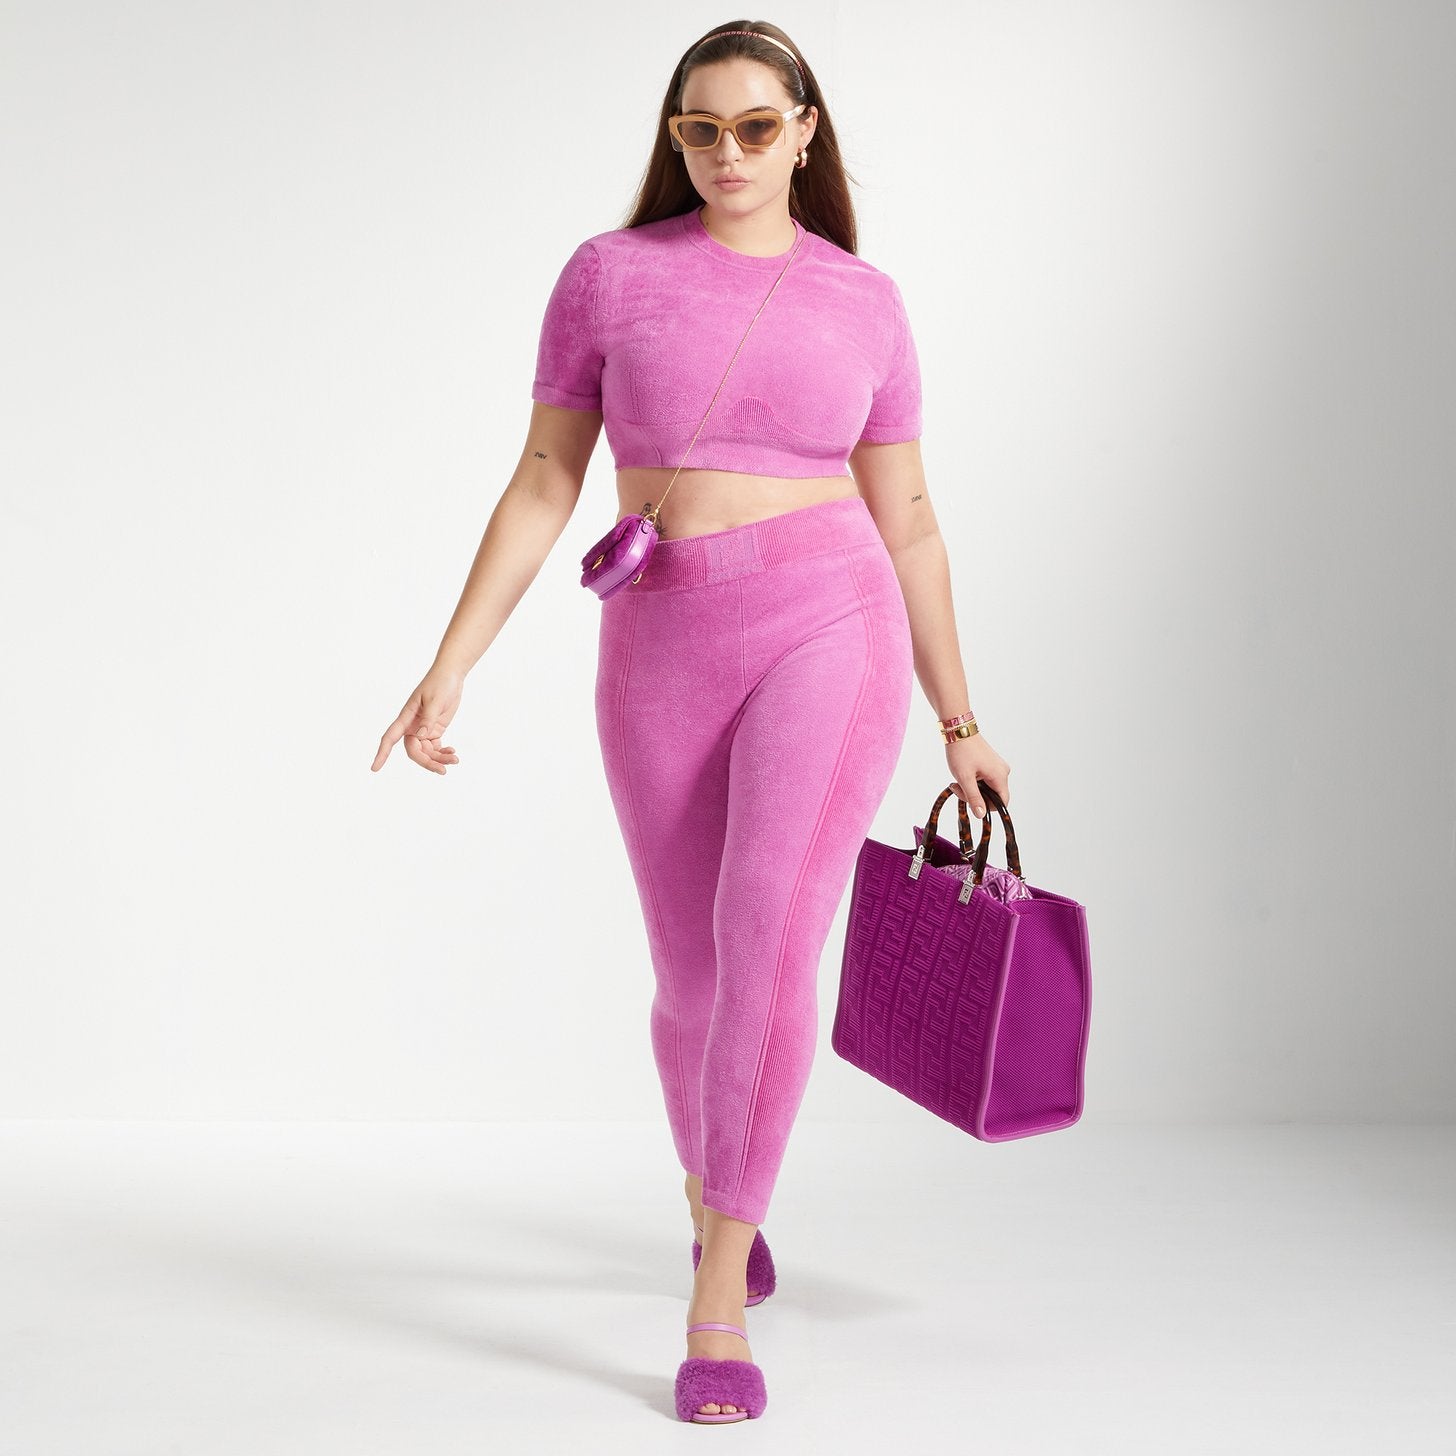 Luxury Meets Shapewear When Fendi Teams Up With Skims